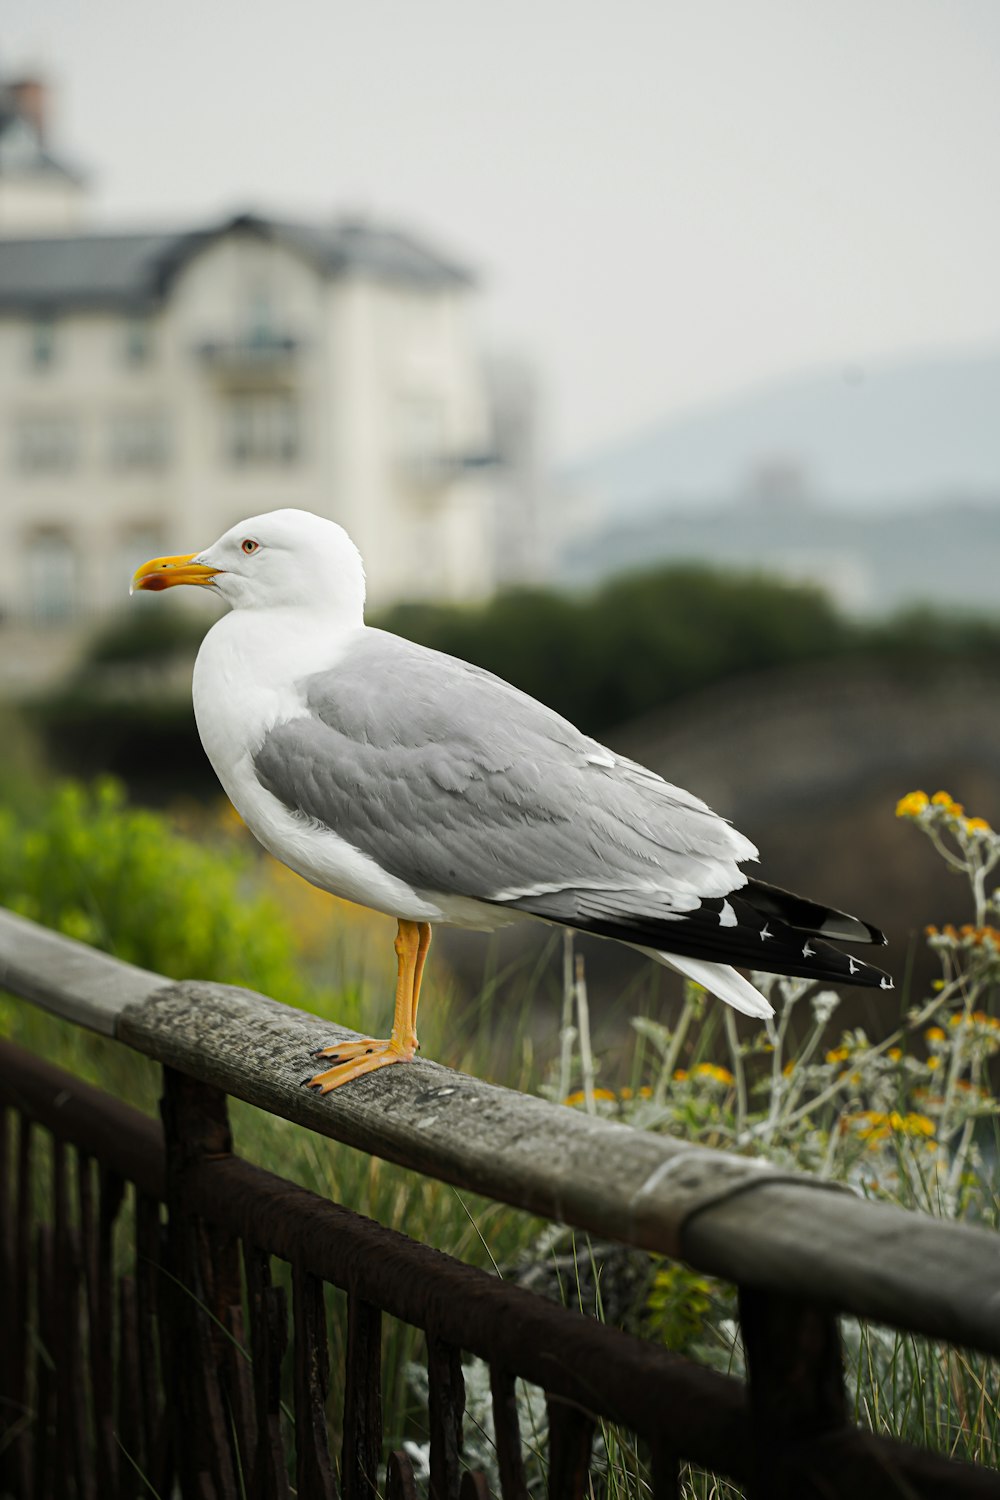 a seagull is standing on a rail by a building